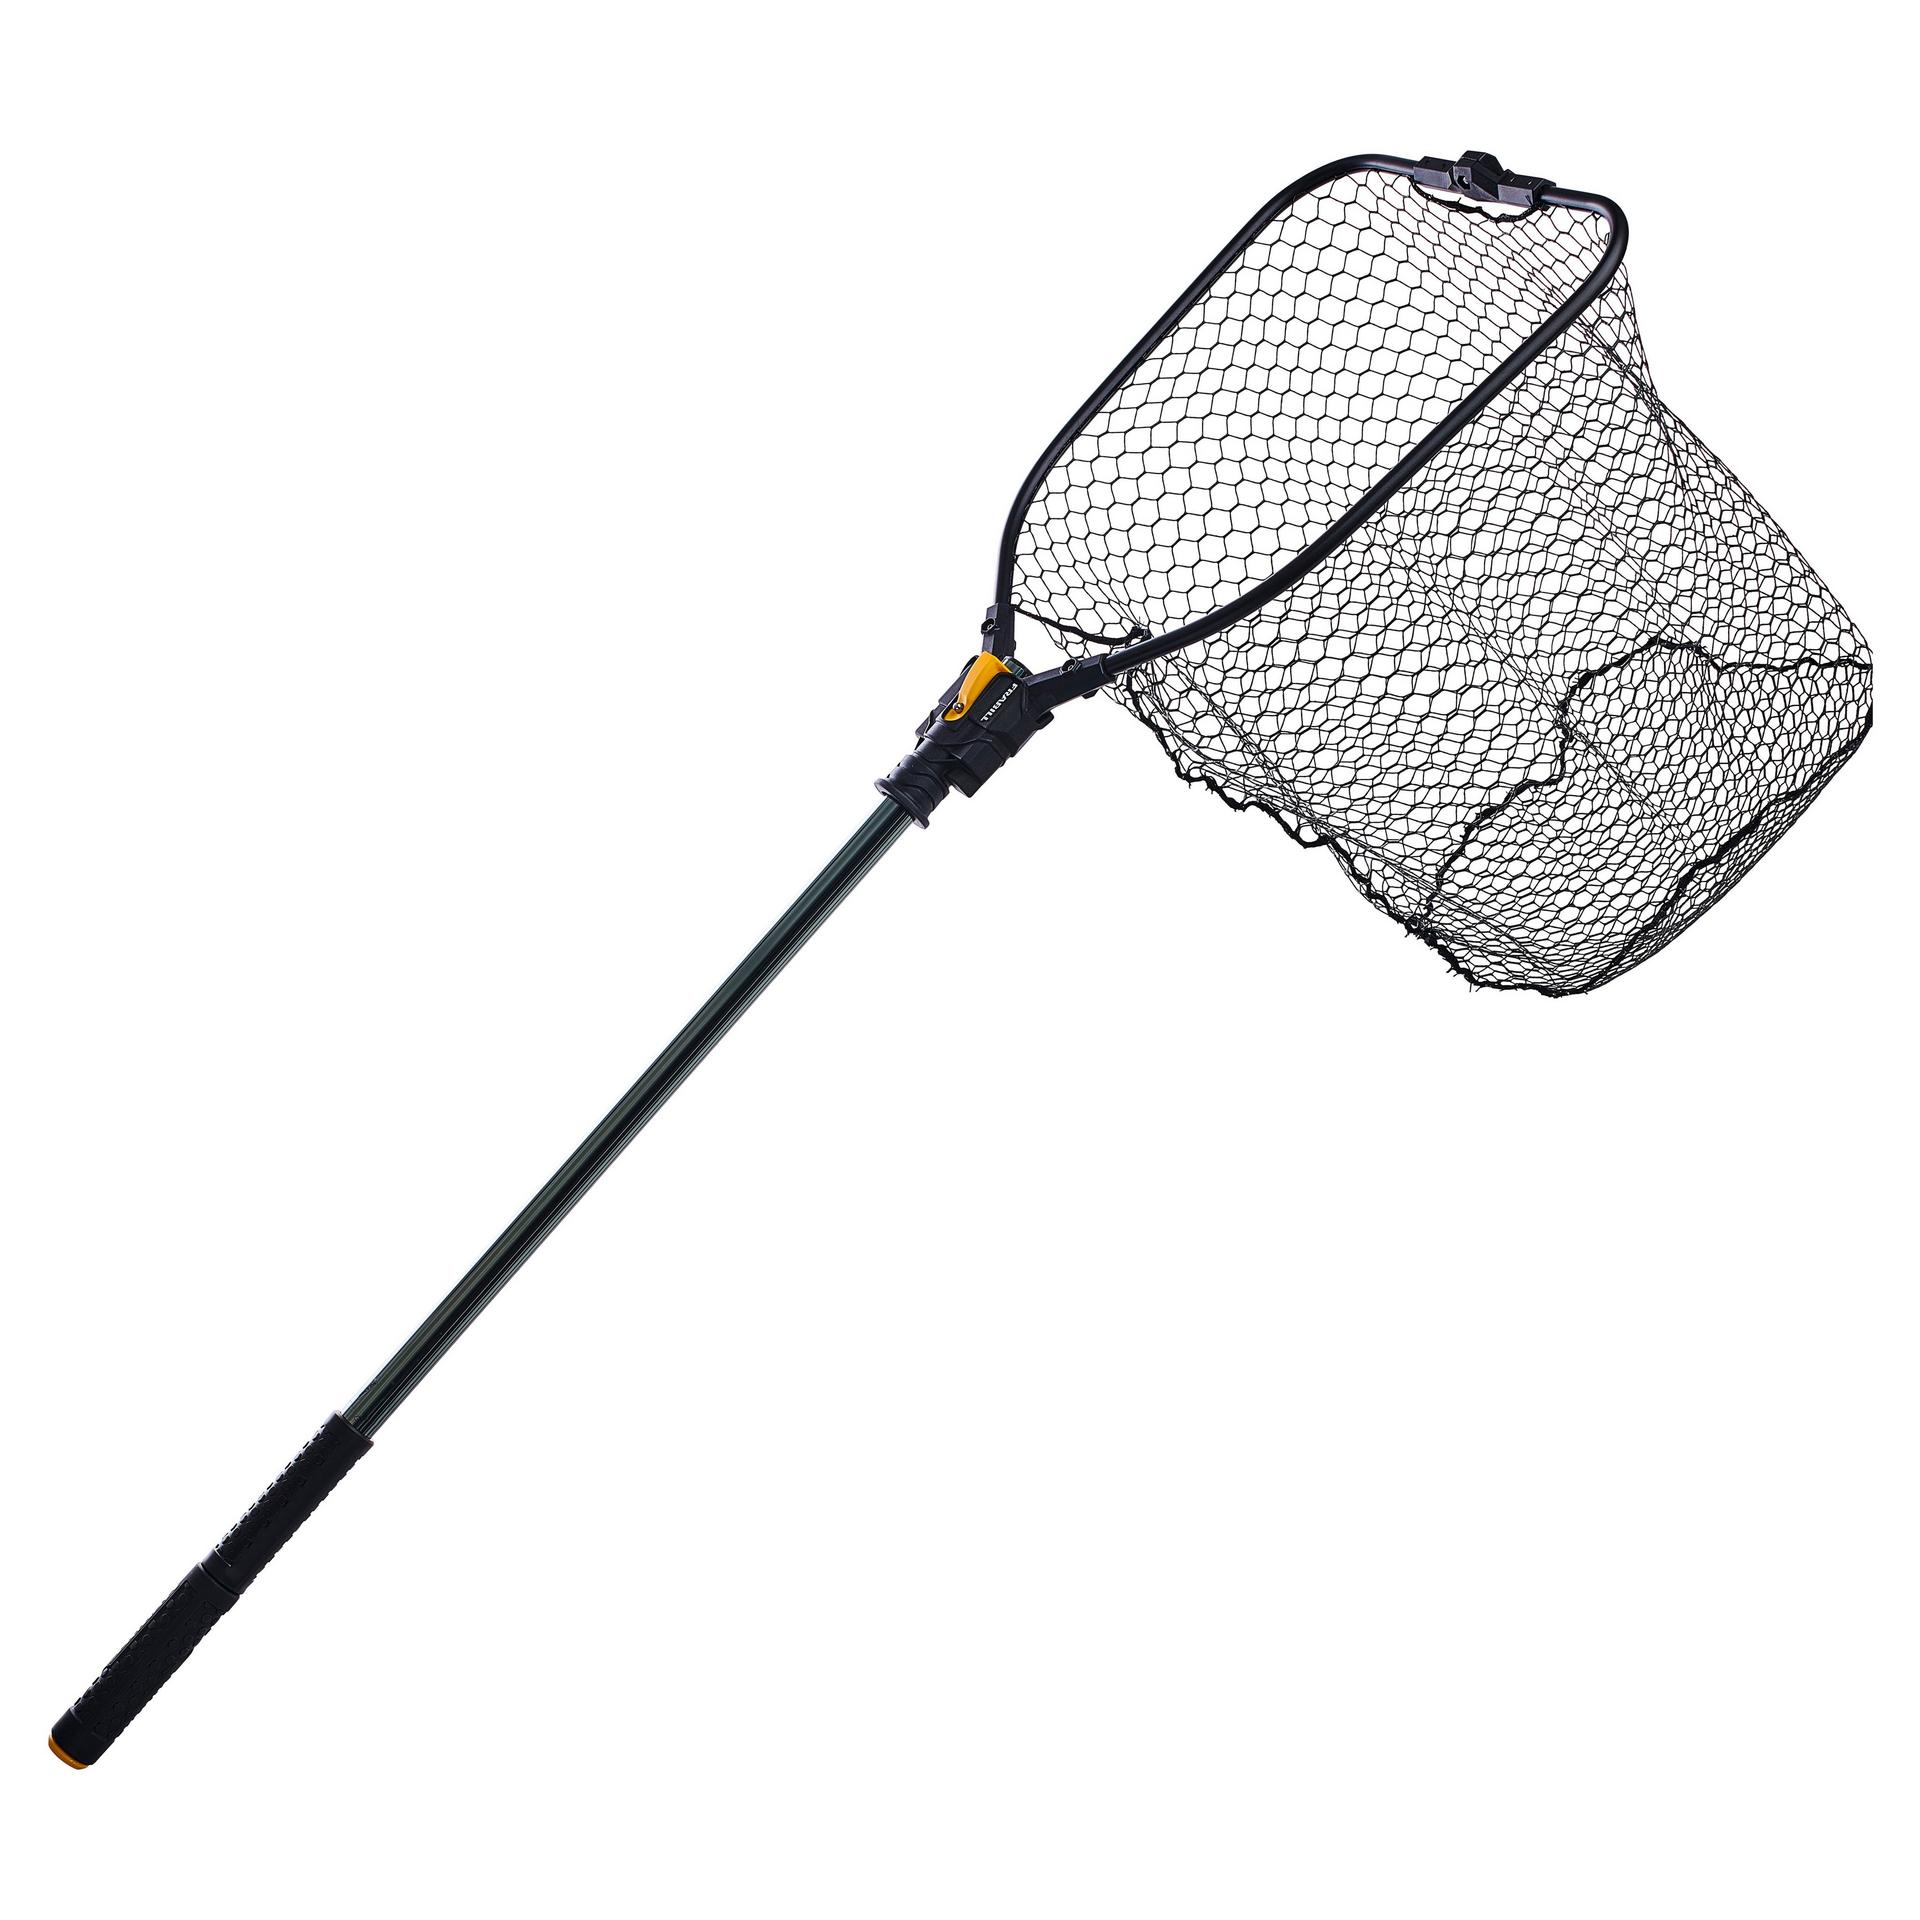 Portable Fishing Net Fish Landing Net, Foldable Collapsible Telescopic Pole  Handle, Durable Nylon Material Mesh, Safe Fish Catching or Releasing